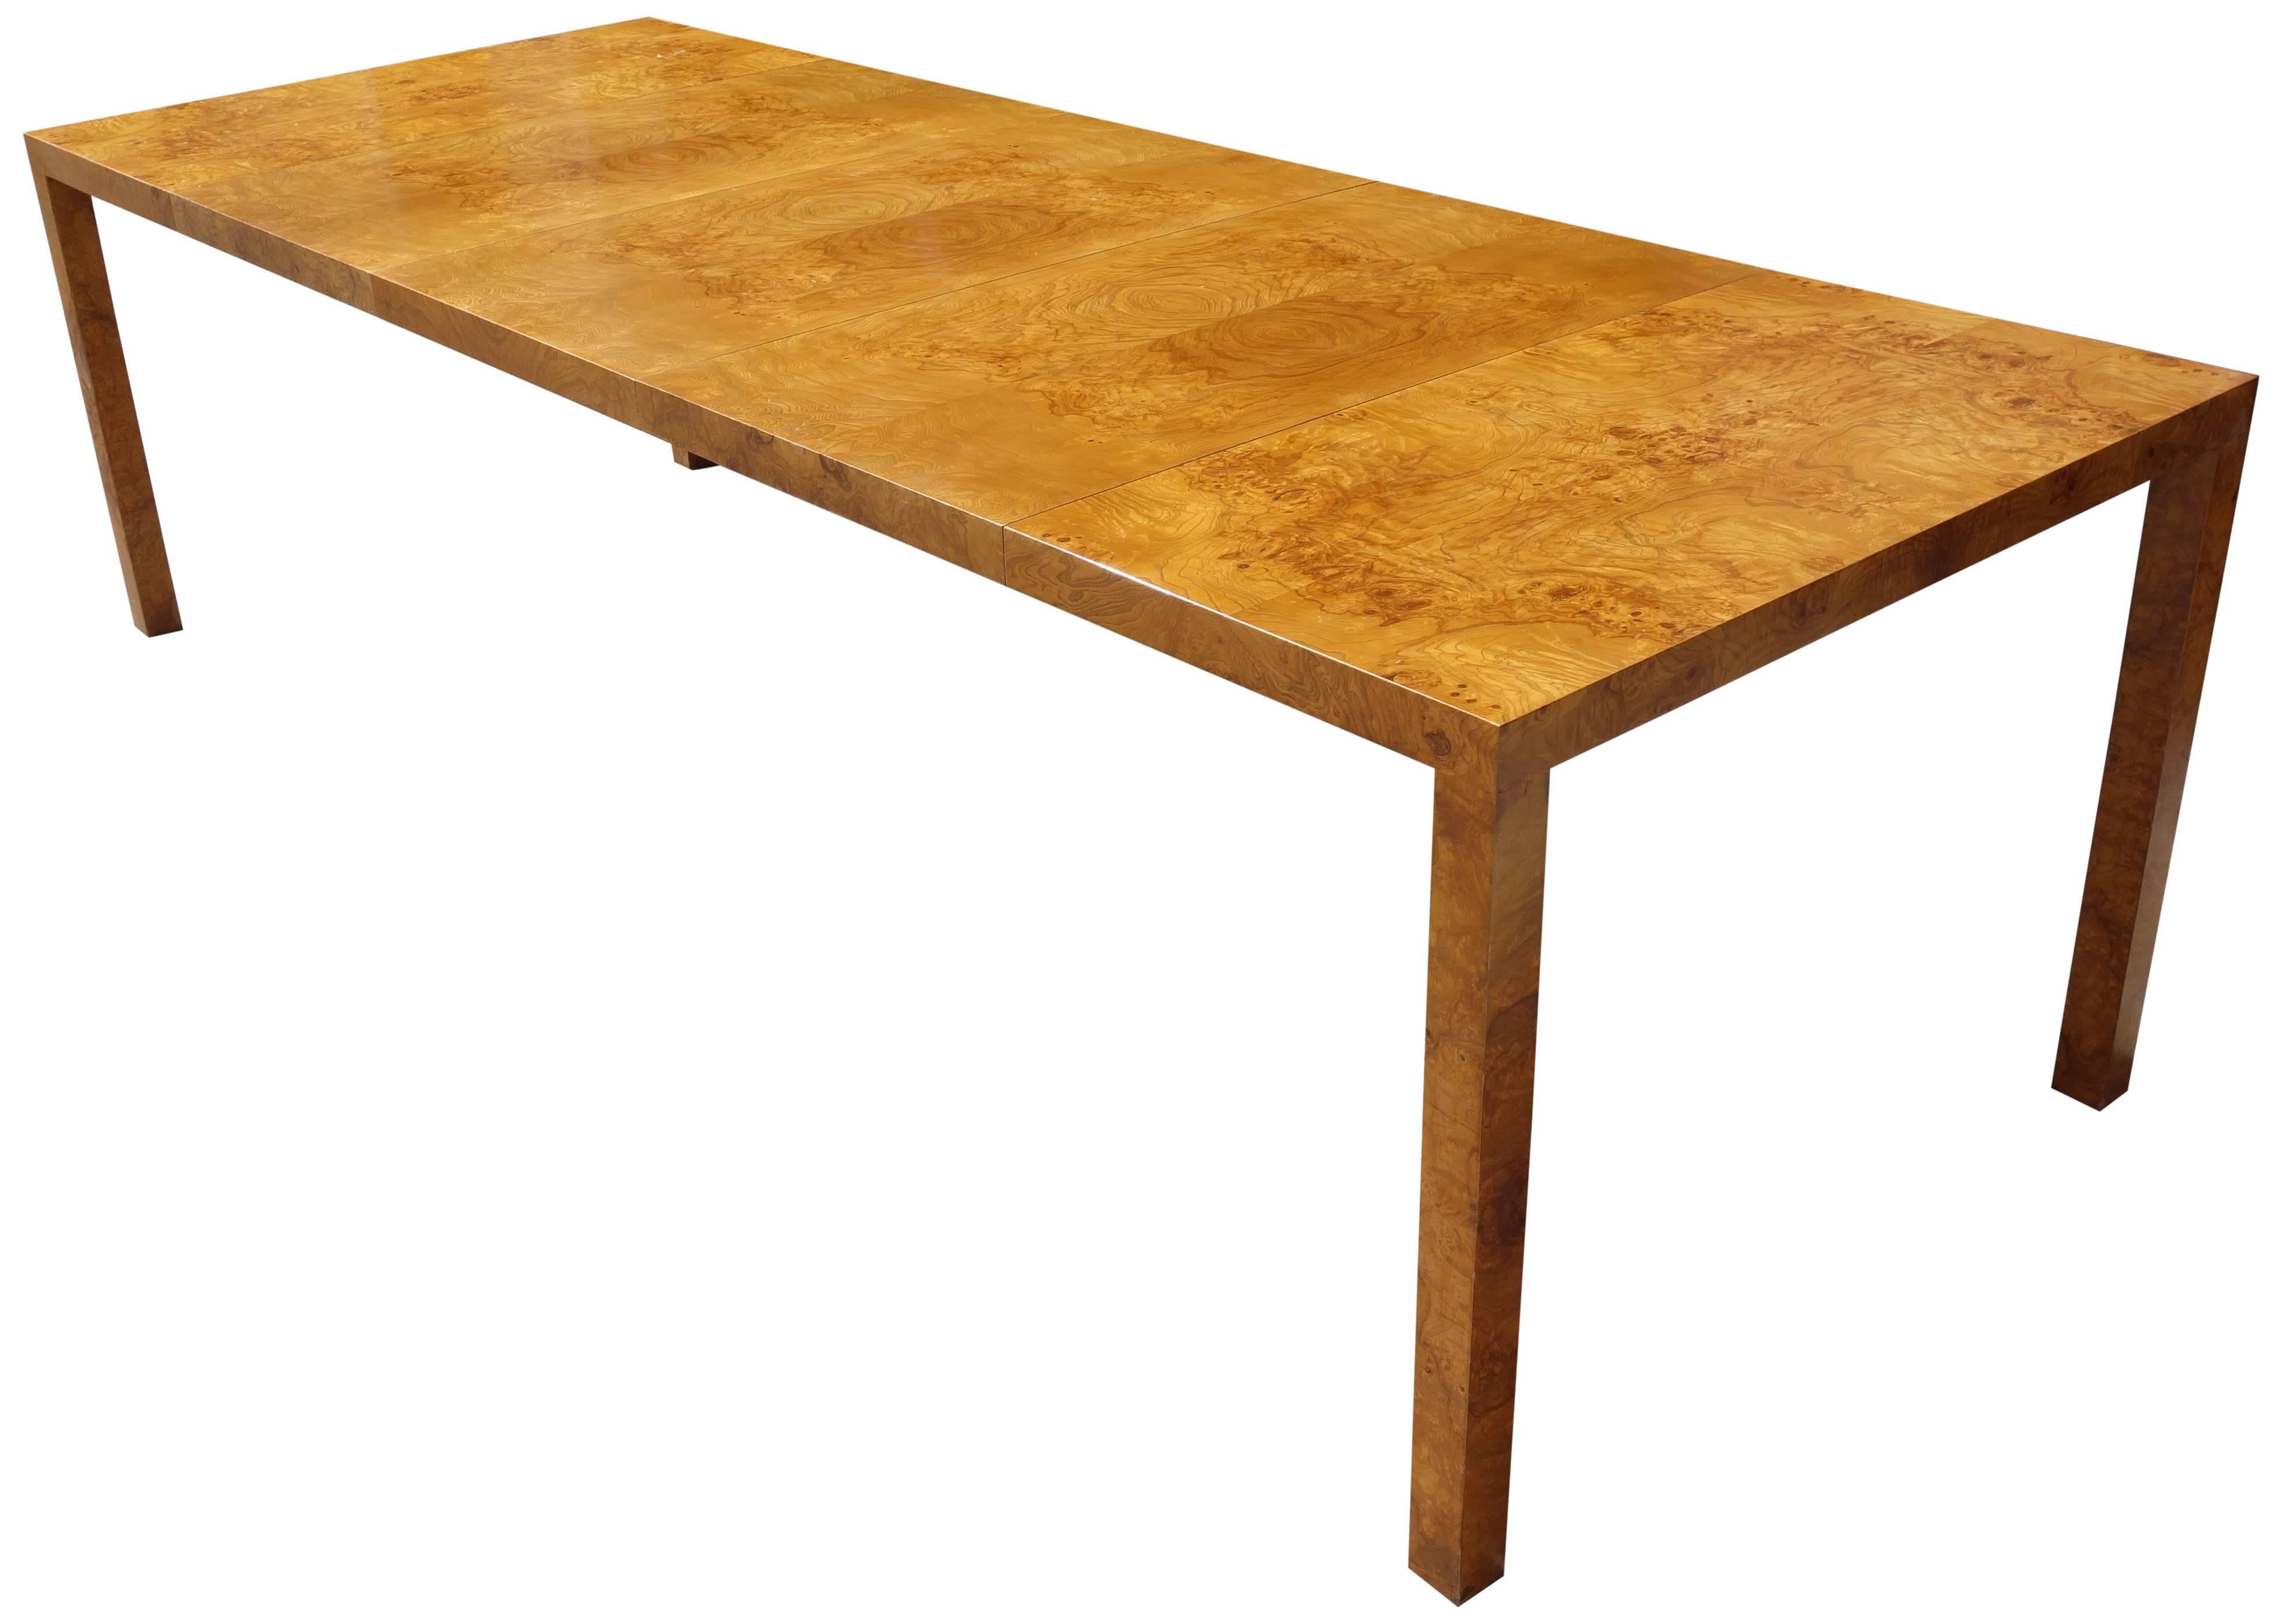 American Exceptional Mid-Century Burl Wood Dining Table by Milo Baughman